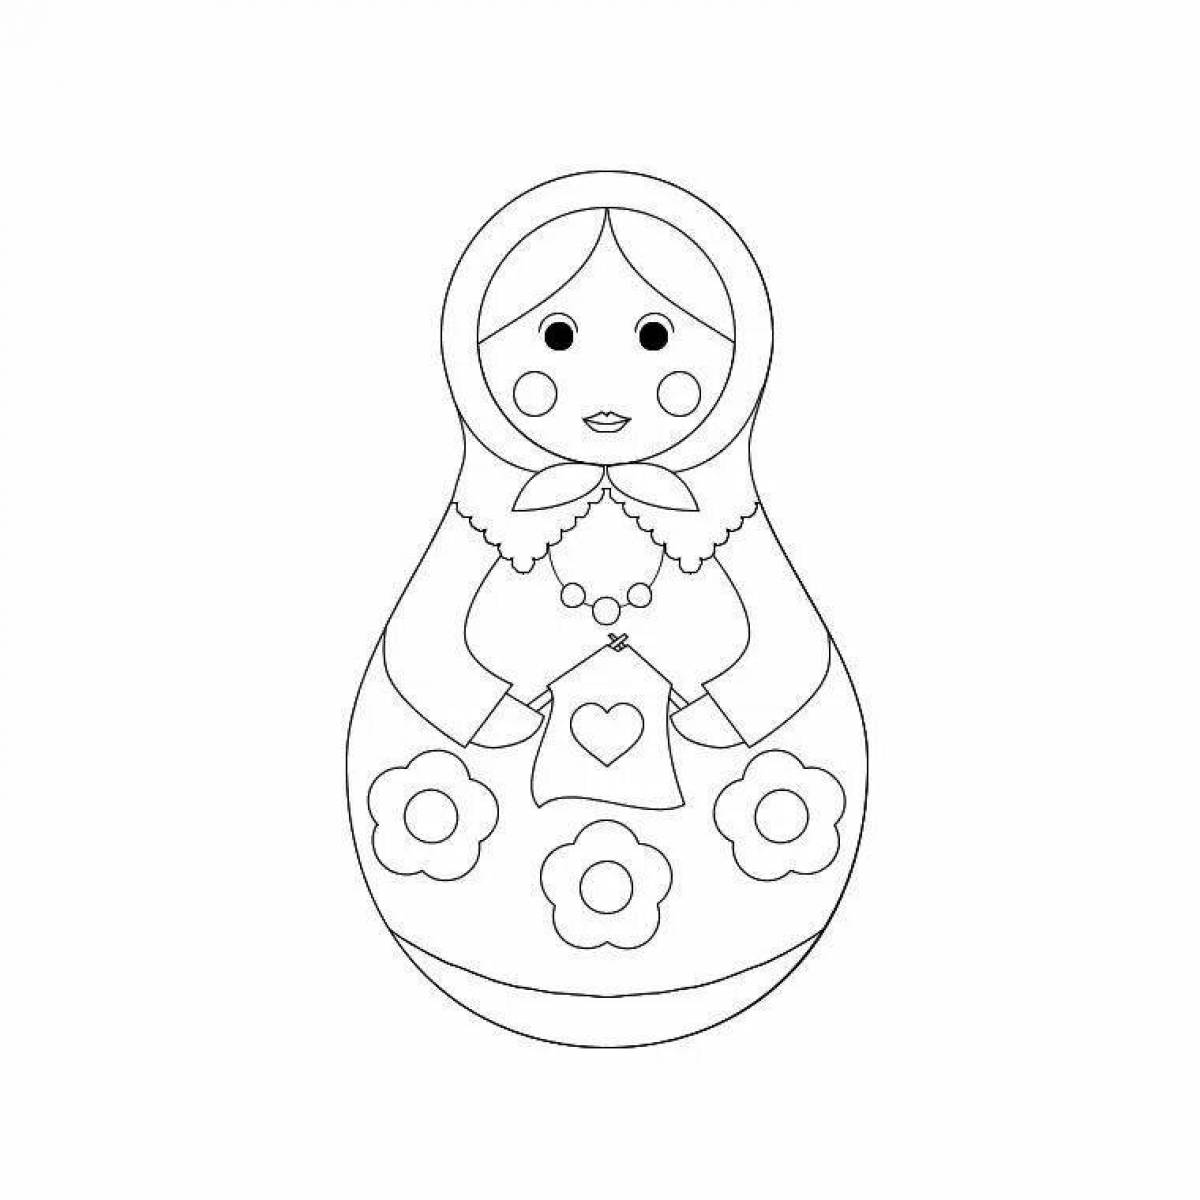 Joyful nesting doll in the middle group